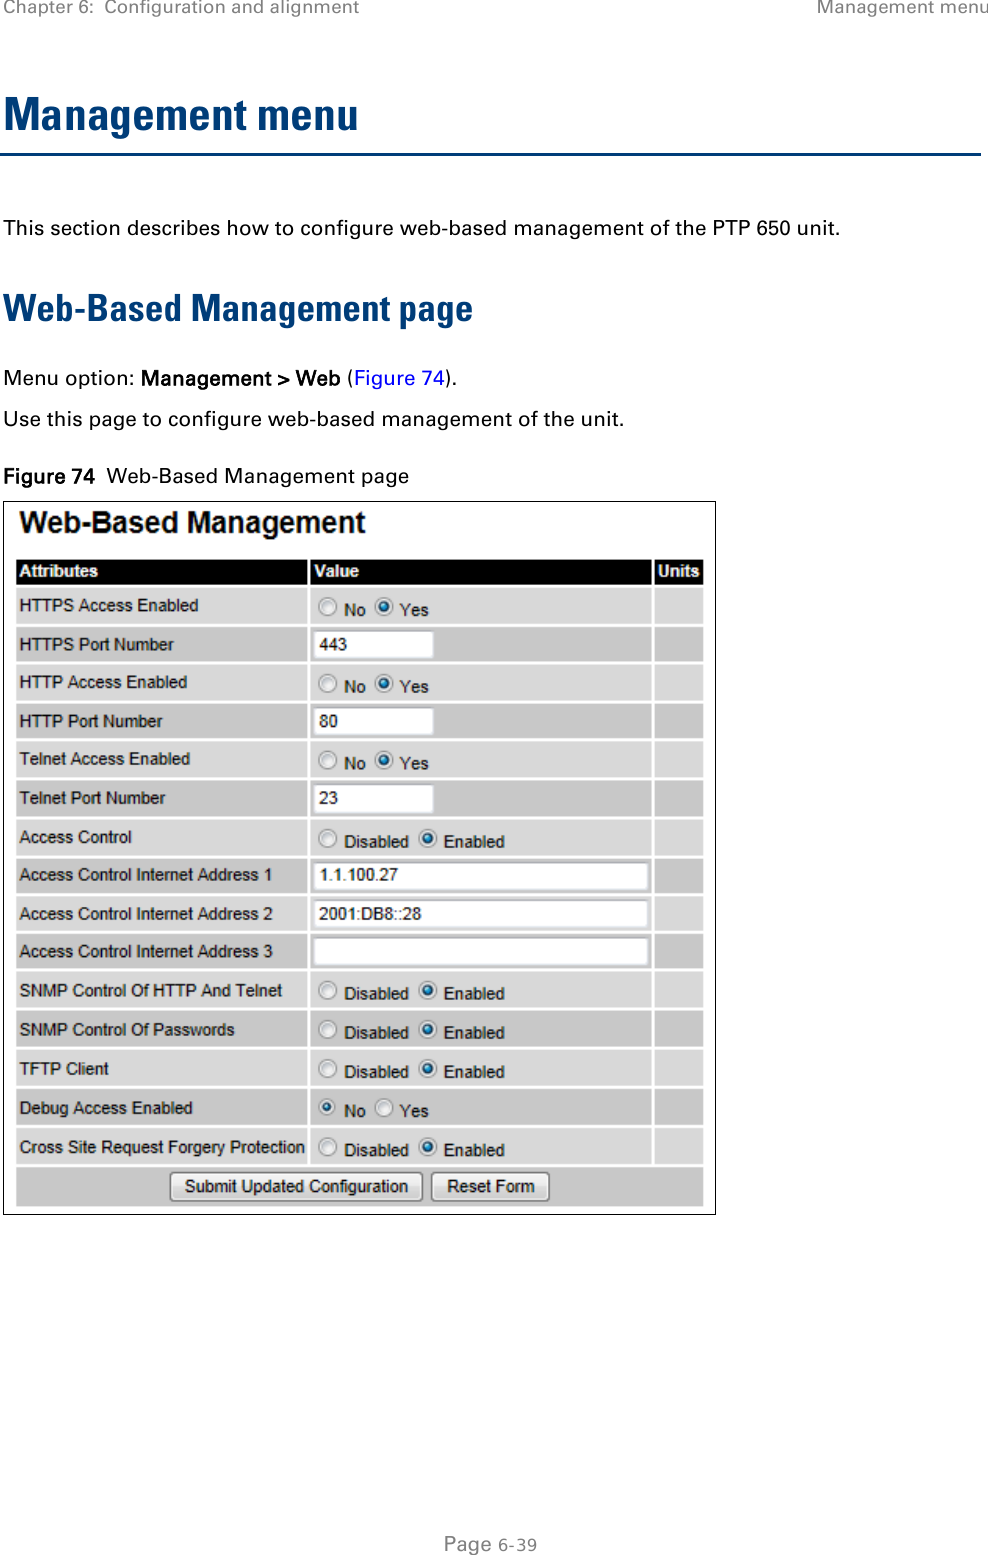 Chapter 6:  Configuration and alignment Management menu  Management menu This section describes how to configure web-based management of the PTP 650 unit. Web-Based Management page Menu option: Management &gt; Web (Figure 74). Use this page to configure web-based management of the unit. Figure 74  Web-Based Management page    Page 6-39 